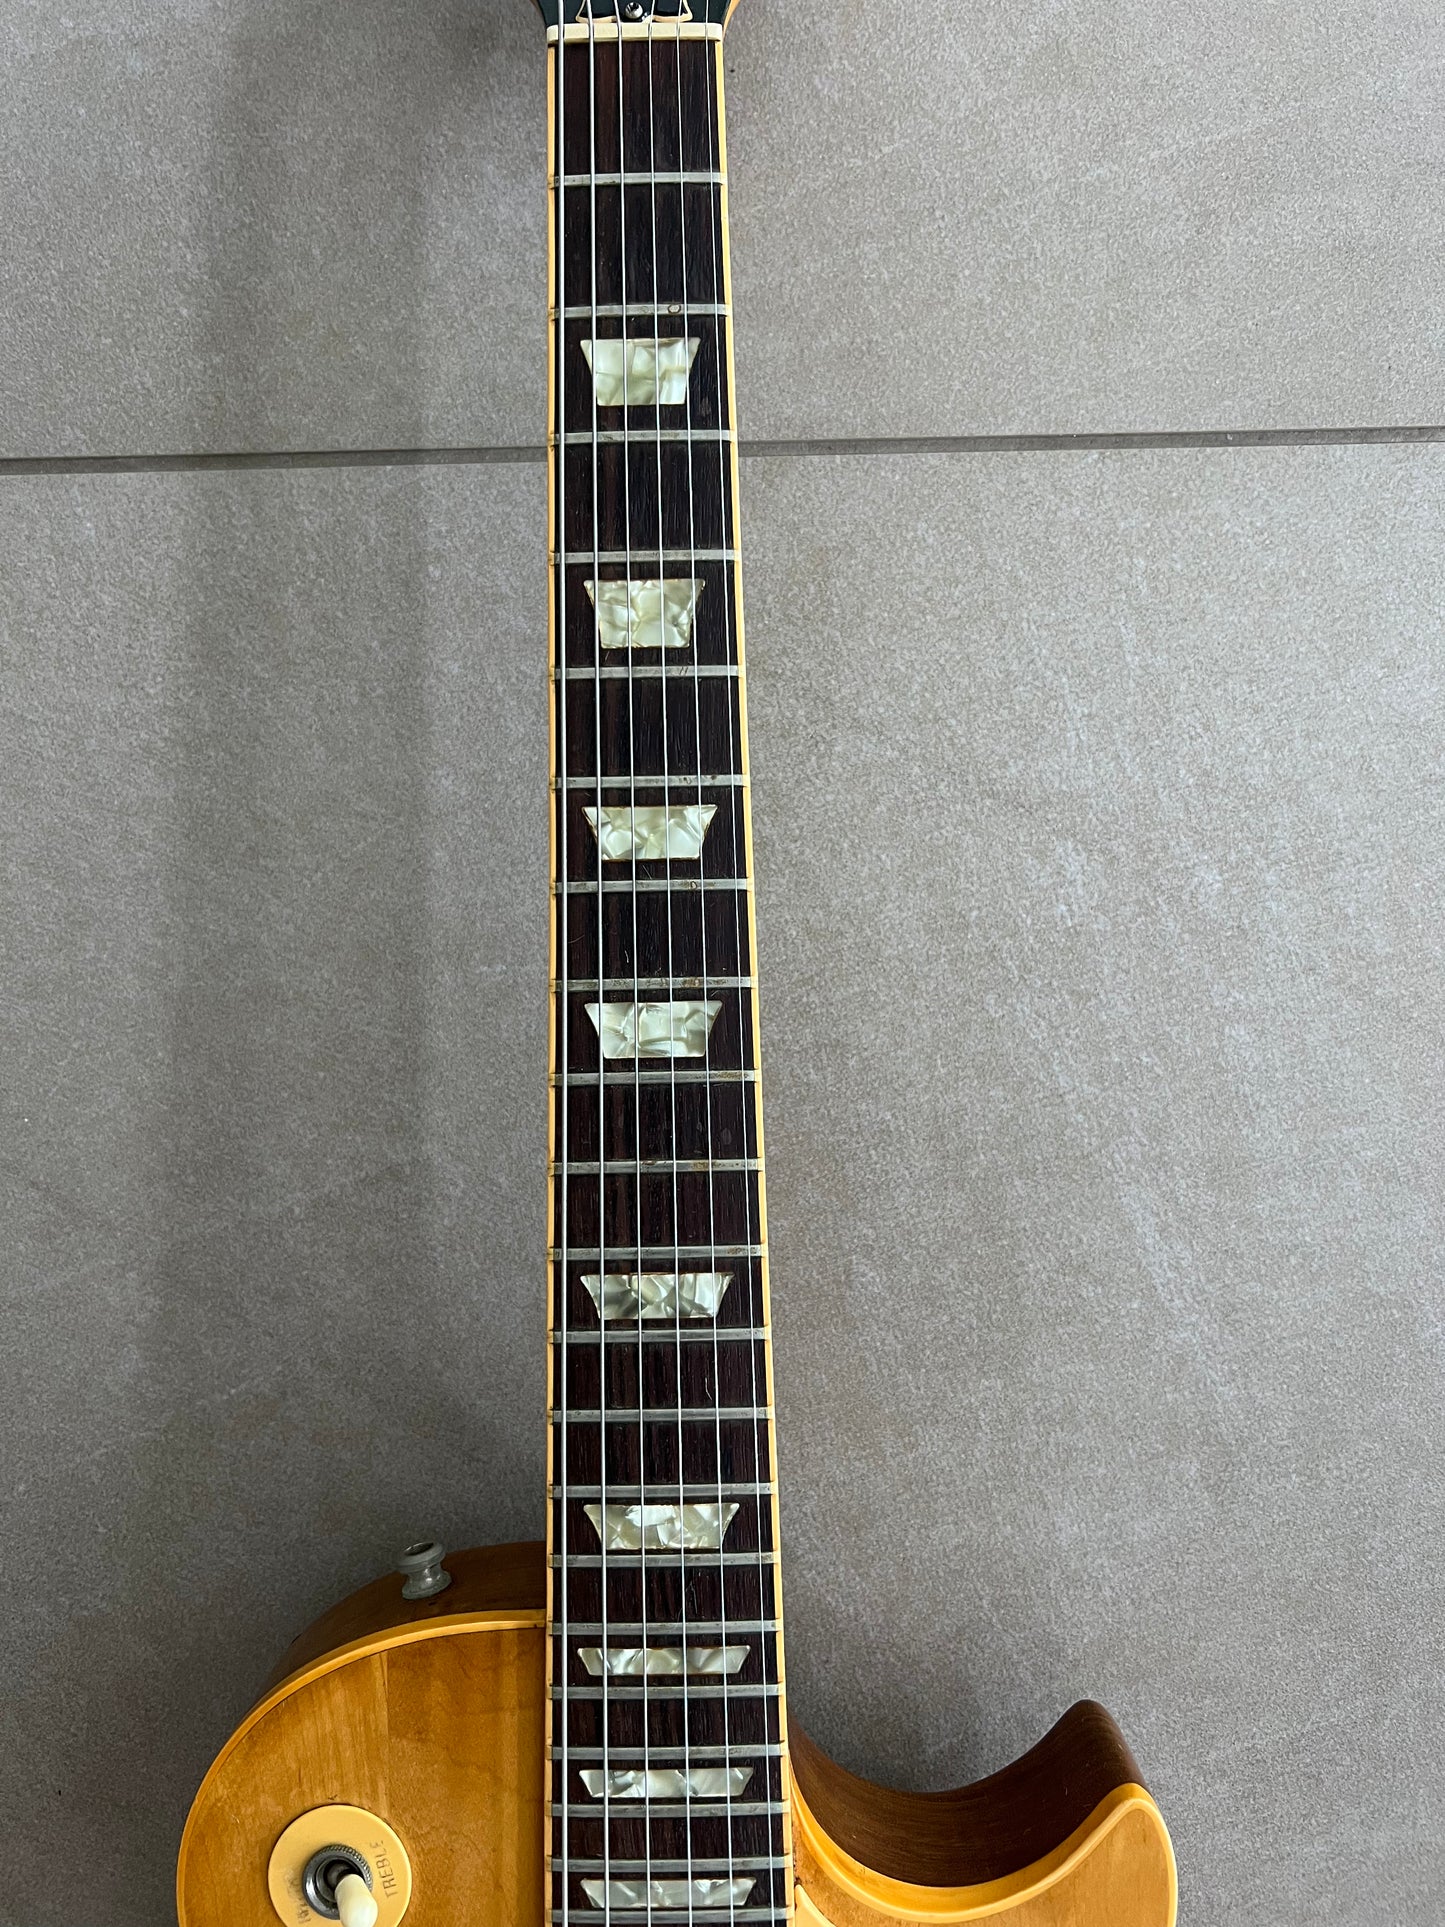 Gibson Les Paul Deluxe Electric Guitar 1981